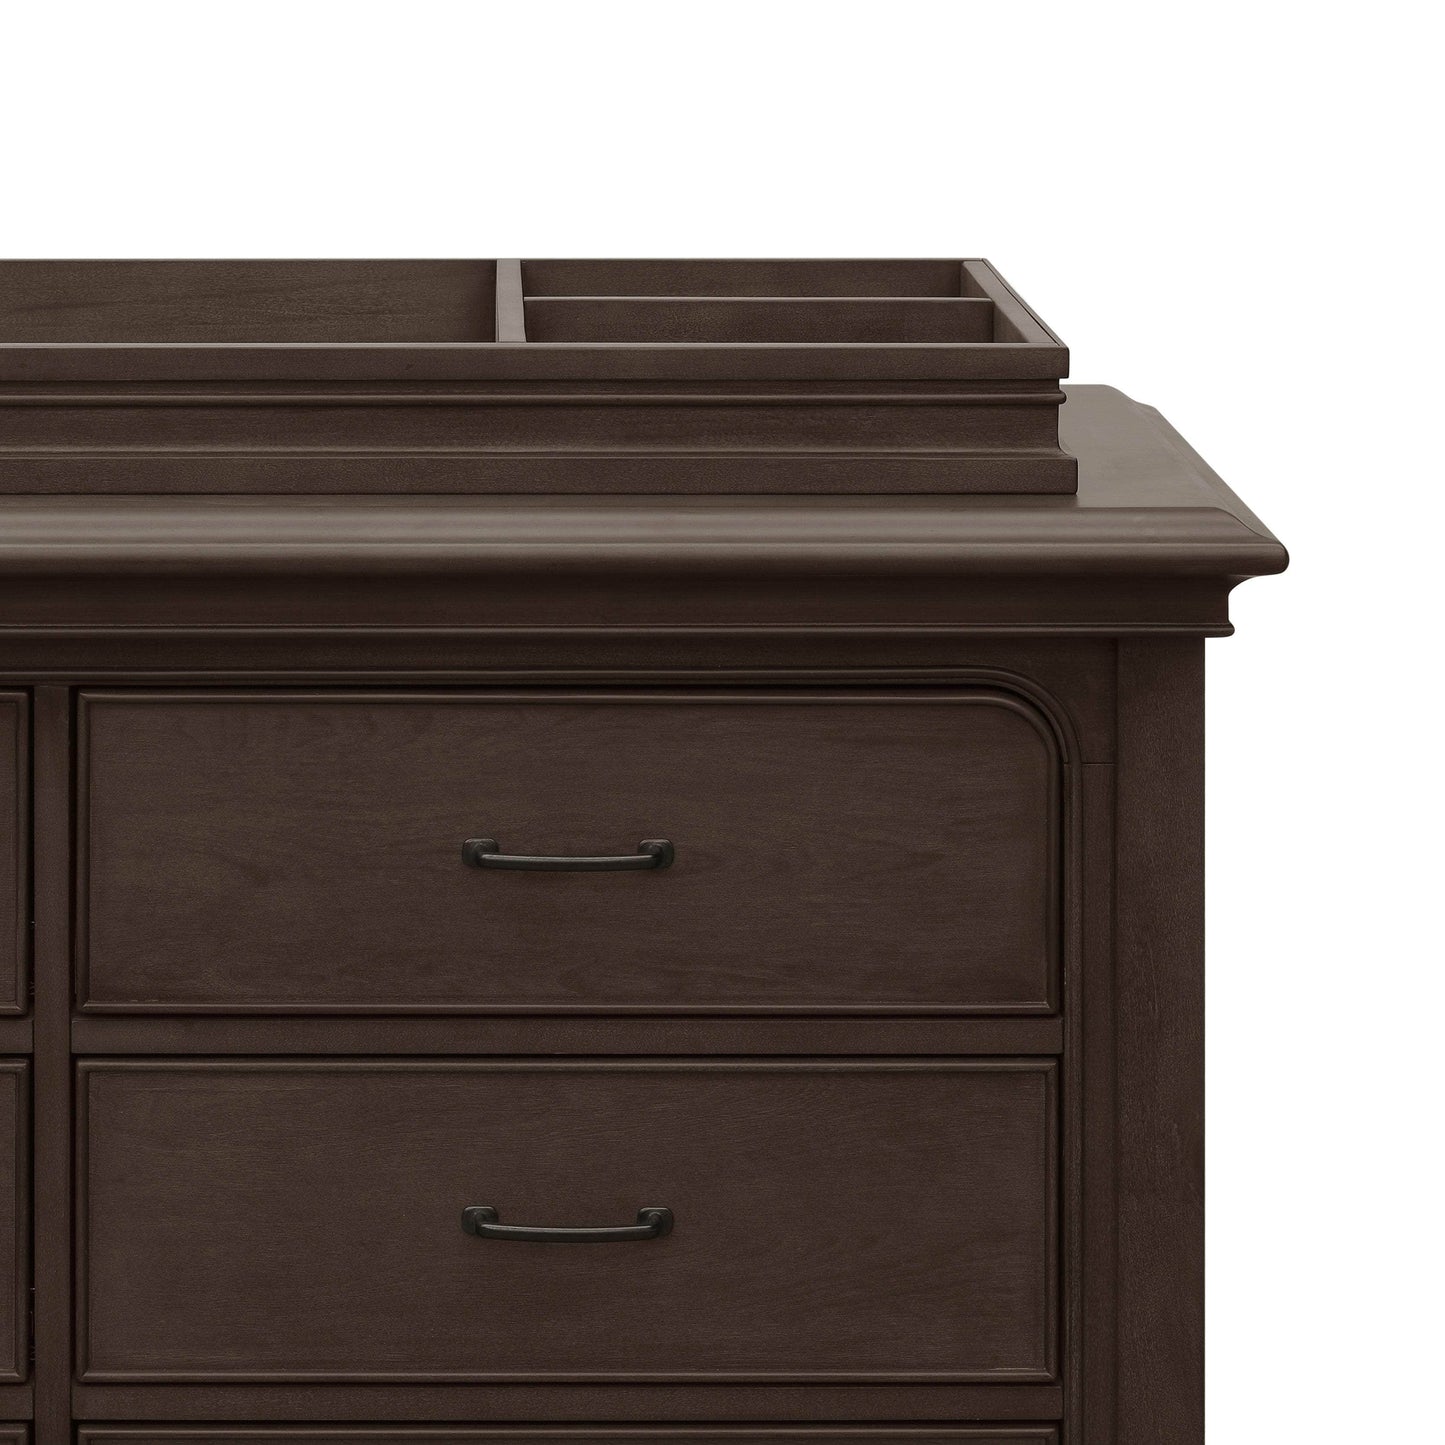 M20419BS,Rhodes Removable Changing Tray in Brownstone